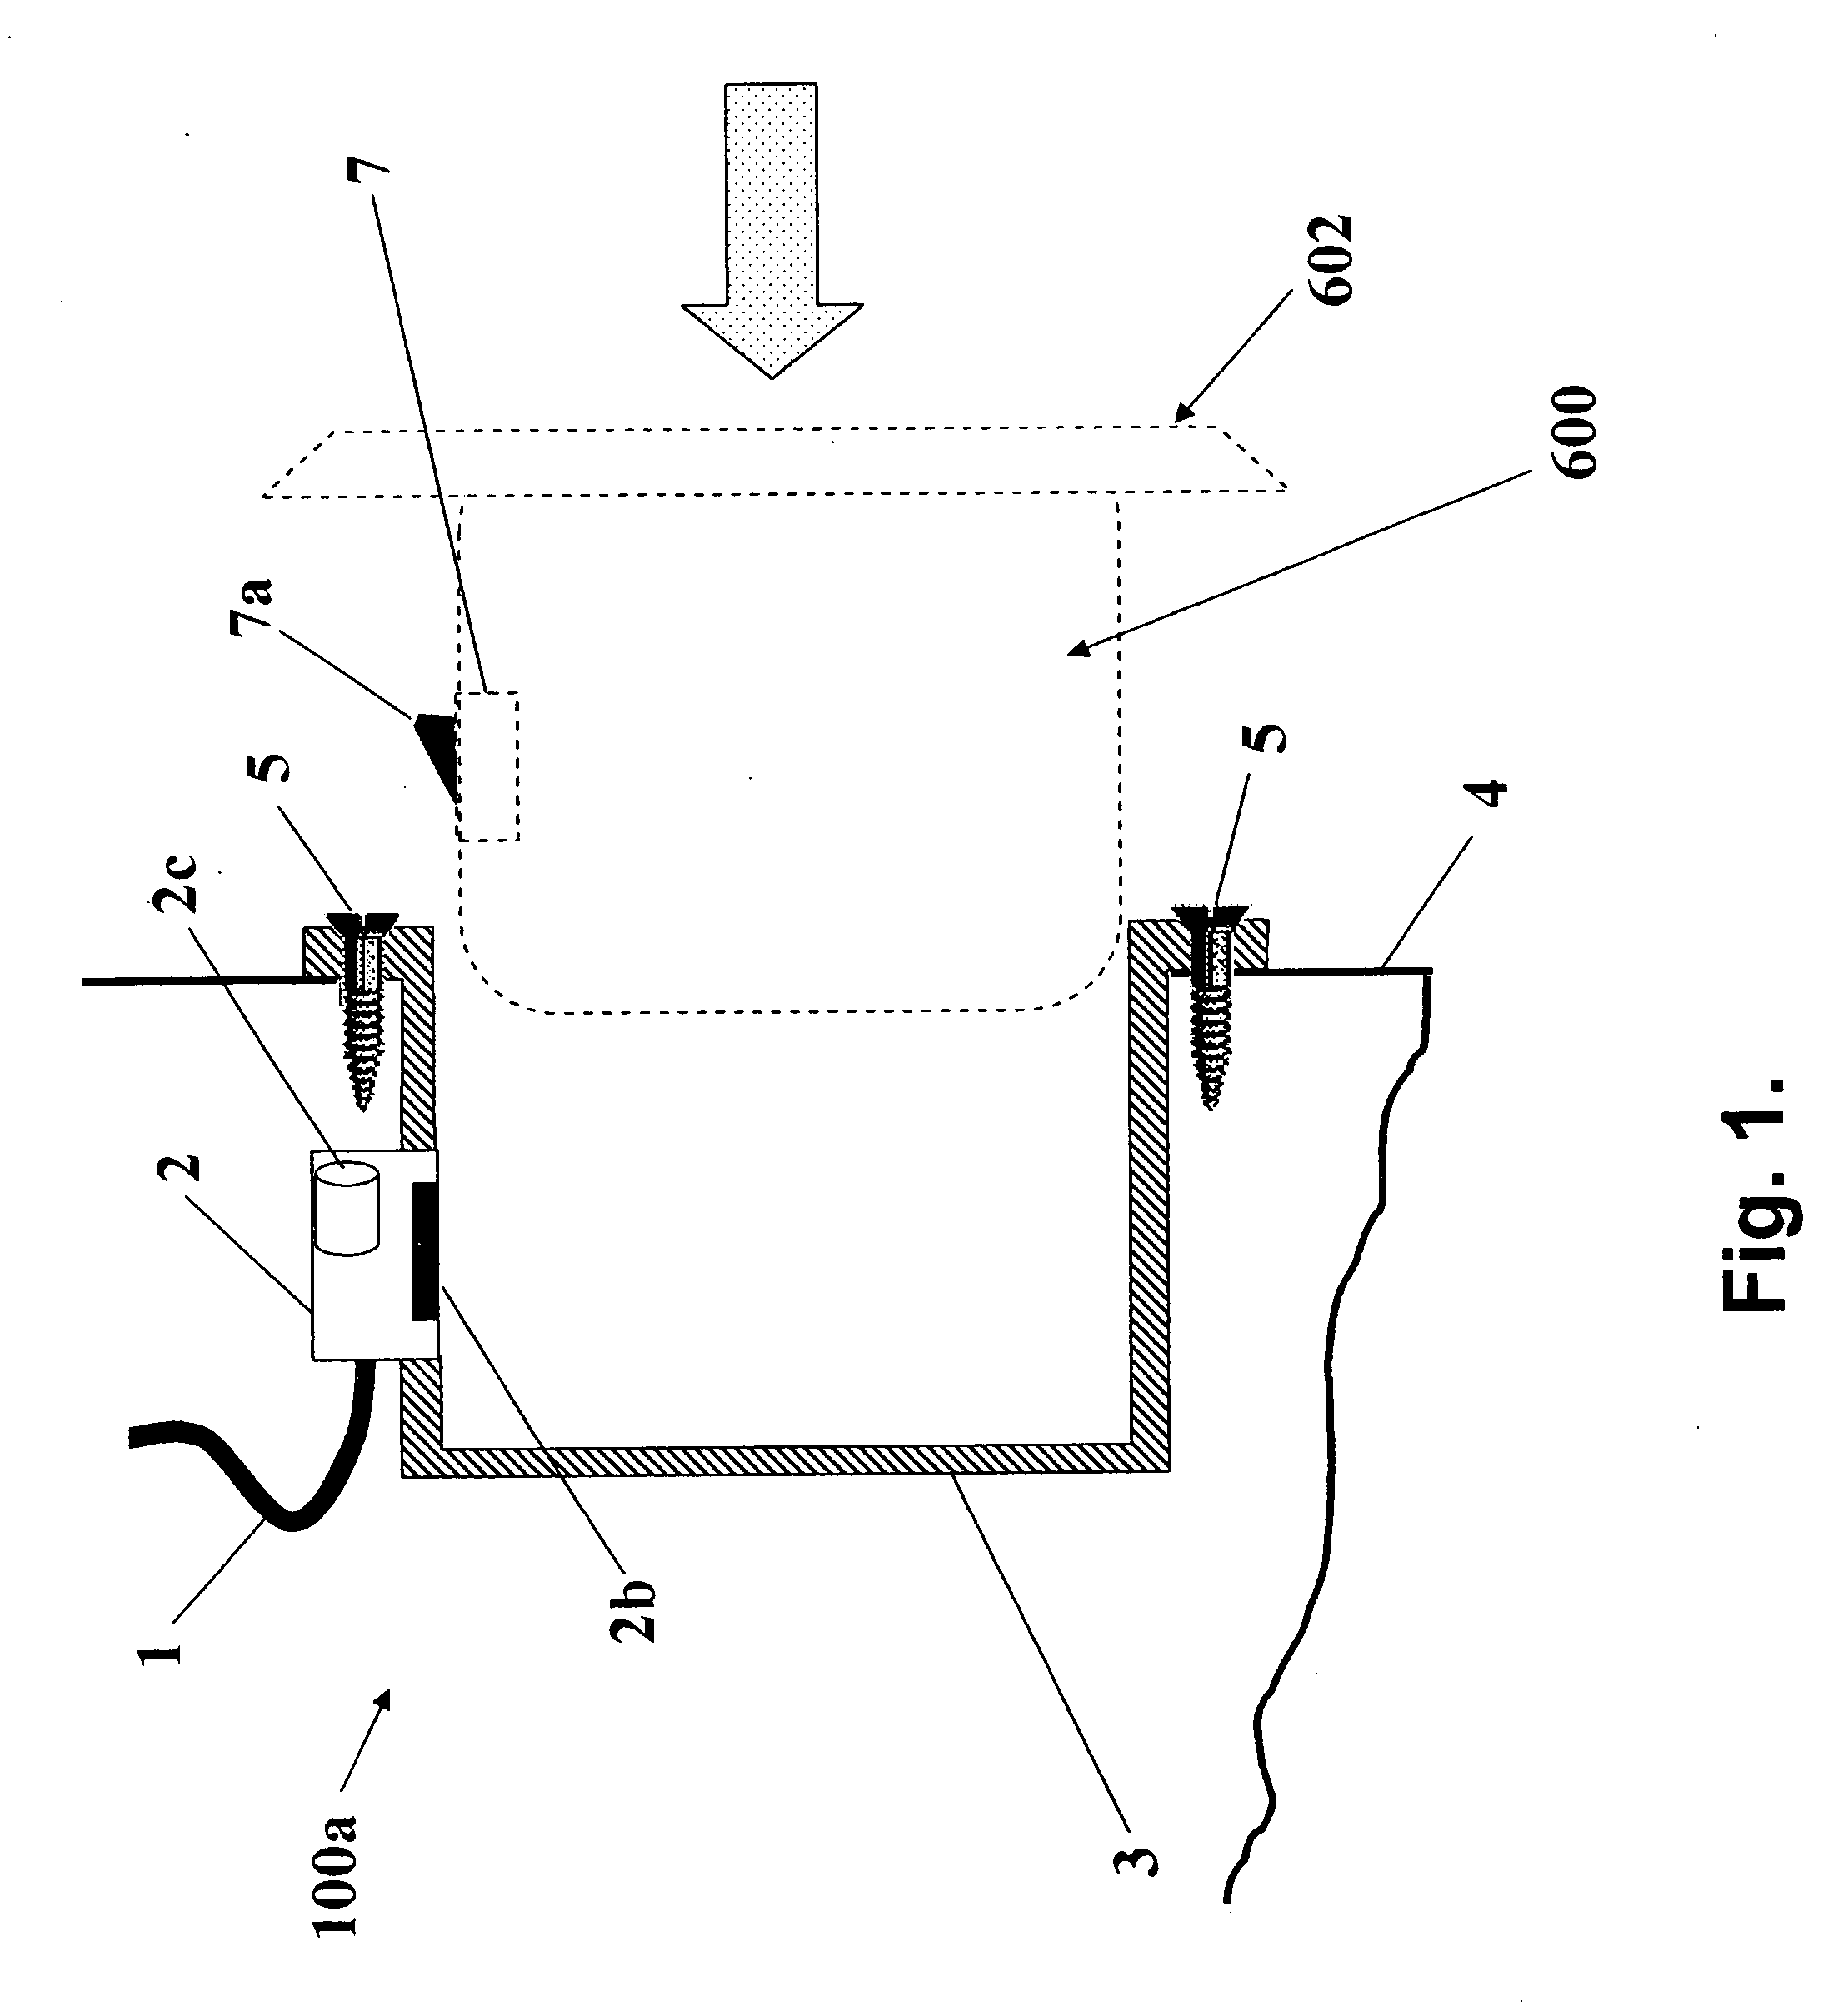 Secured computing system using wall mounted insertable modules